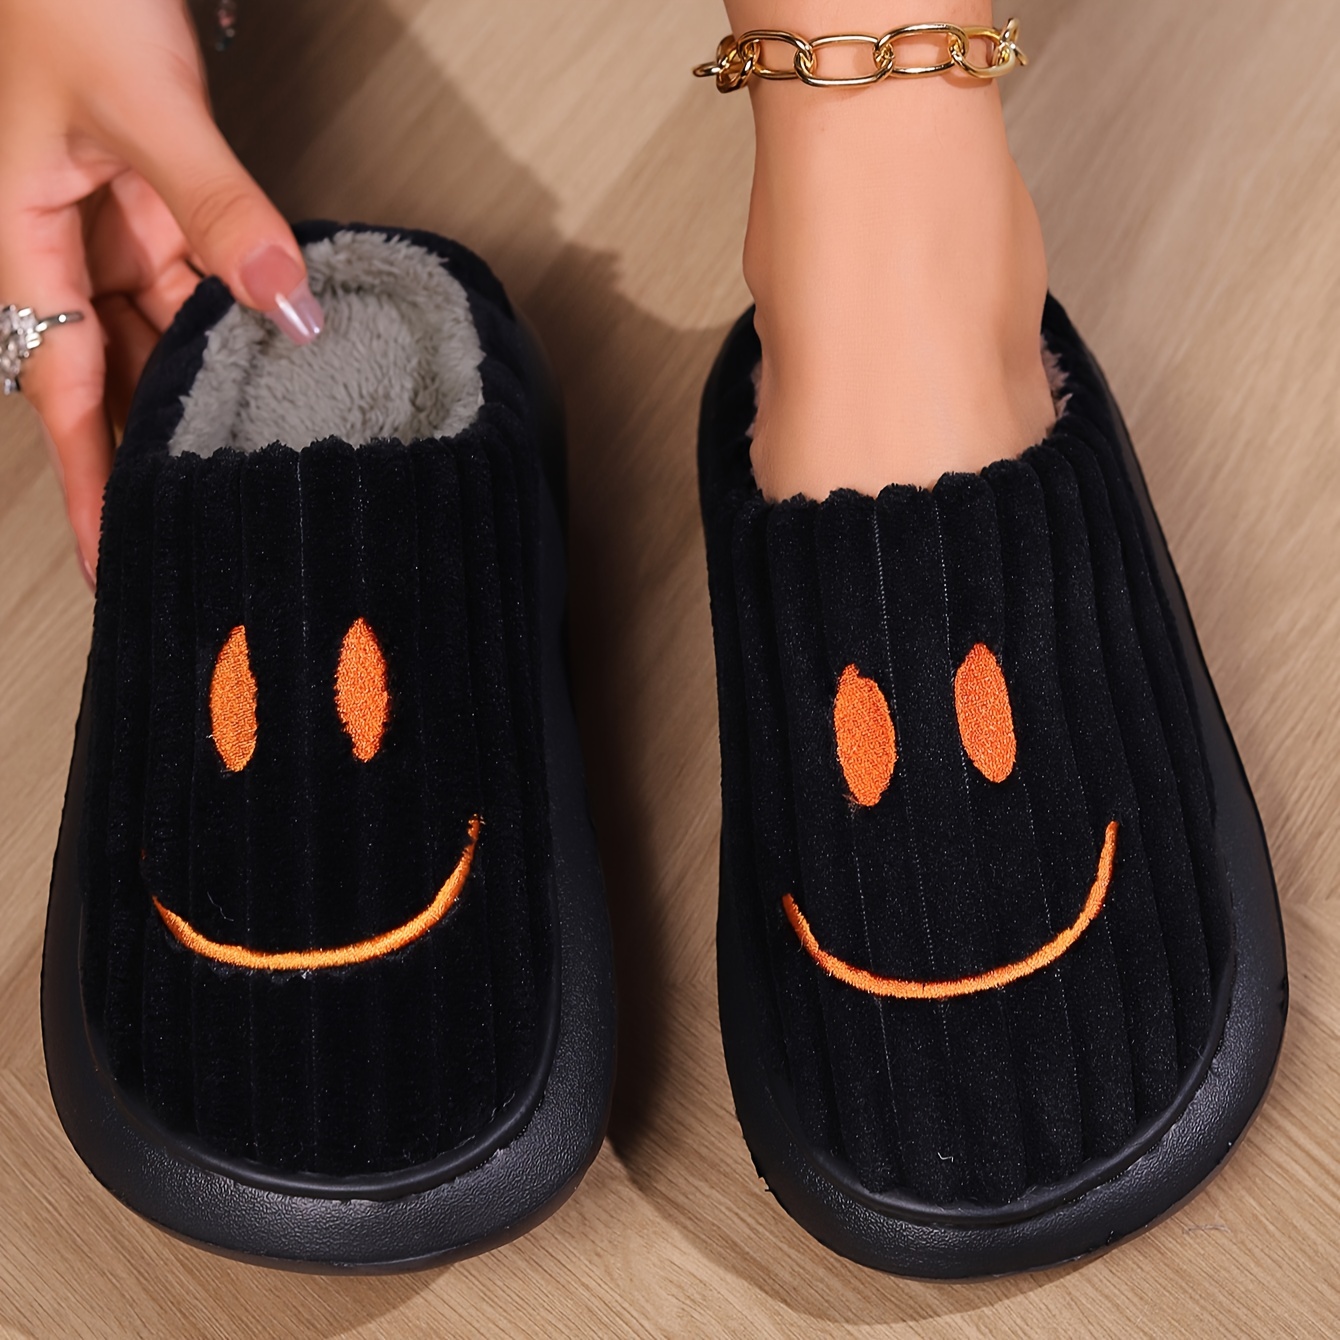 

Cute Smile Face Pattern Plush Slippers, Winter Closed Toe Soft Sole Slip On Fuzzy Shoes, Cozy & Warm Home Slippers